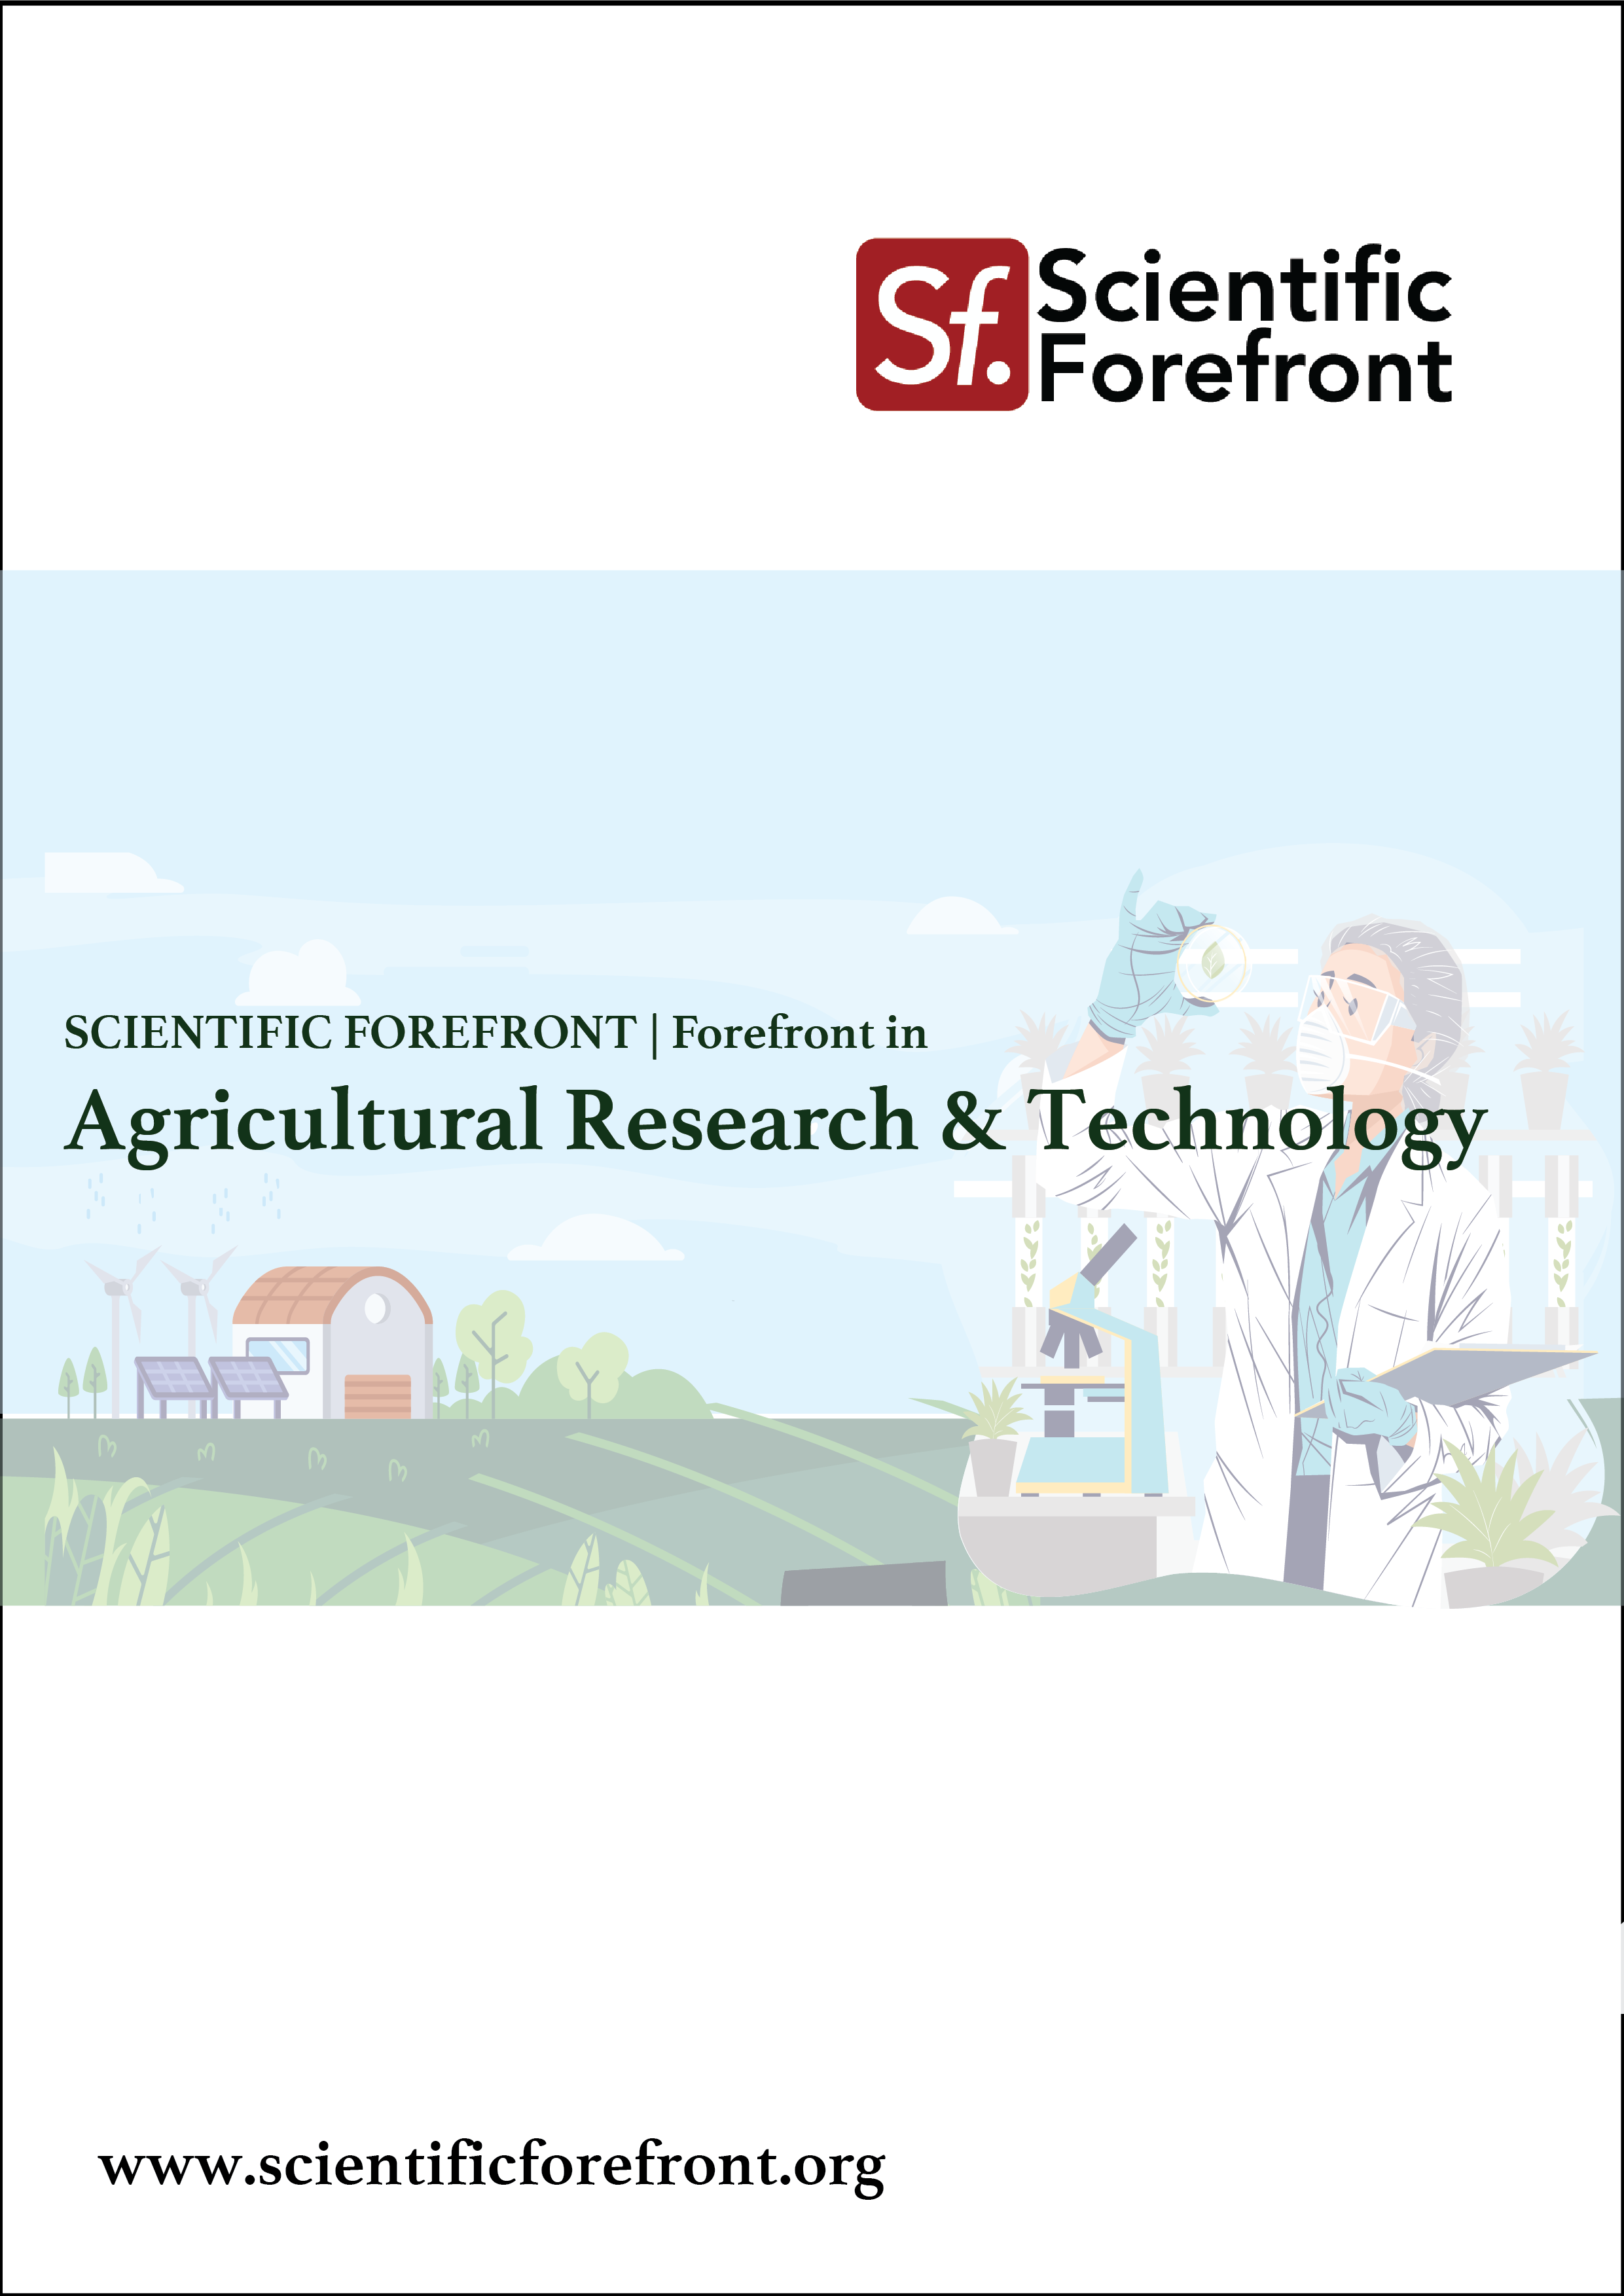 Forefront in Agricultural Research & Technology